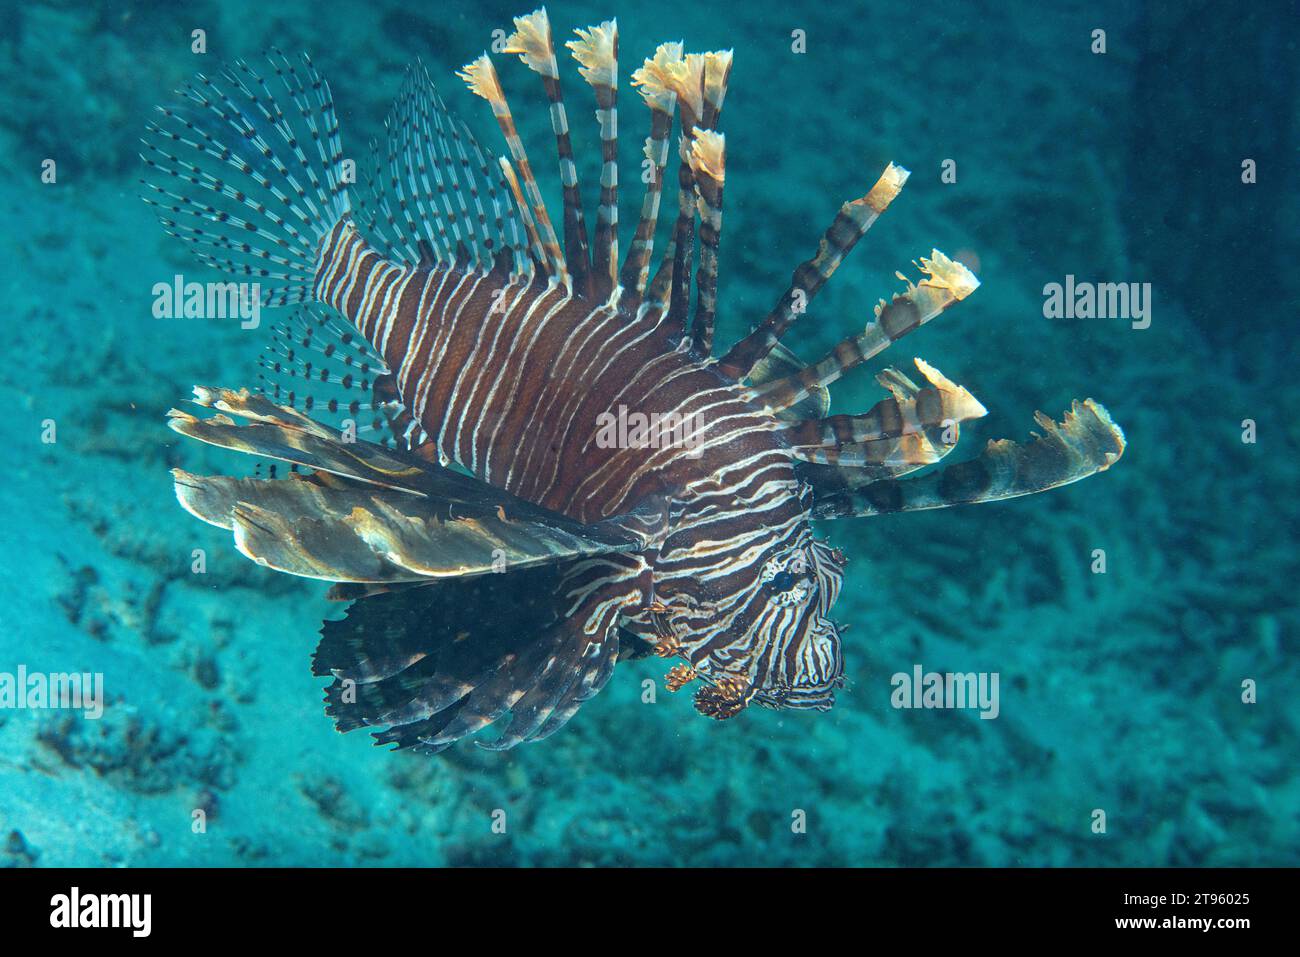 Red lion-fish swims over corals of Bali Stock Photo